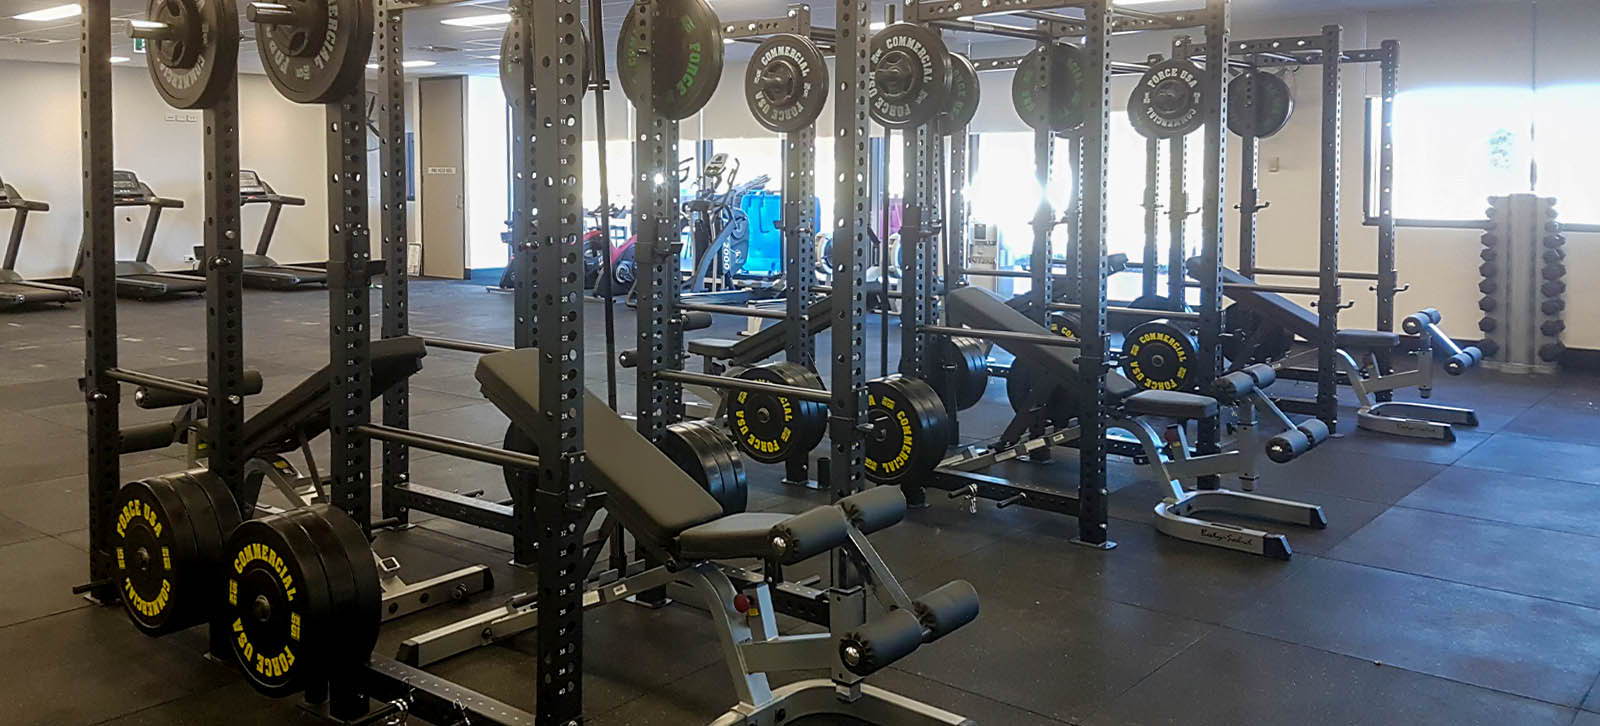 Fire Station Gym Fit Out featuring durable training rigs for versatile functional fitness exercises